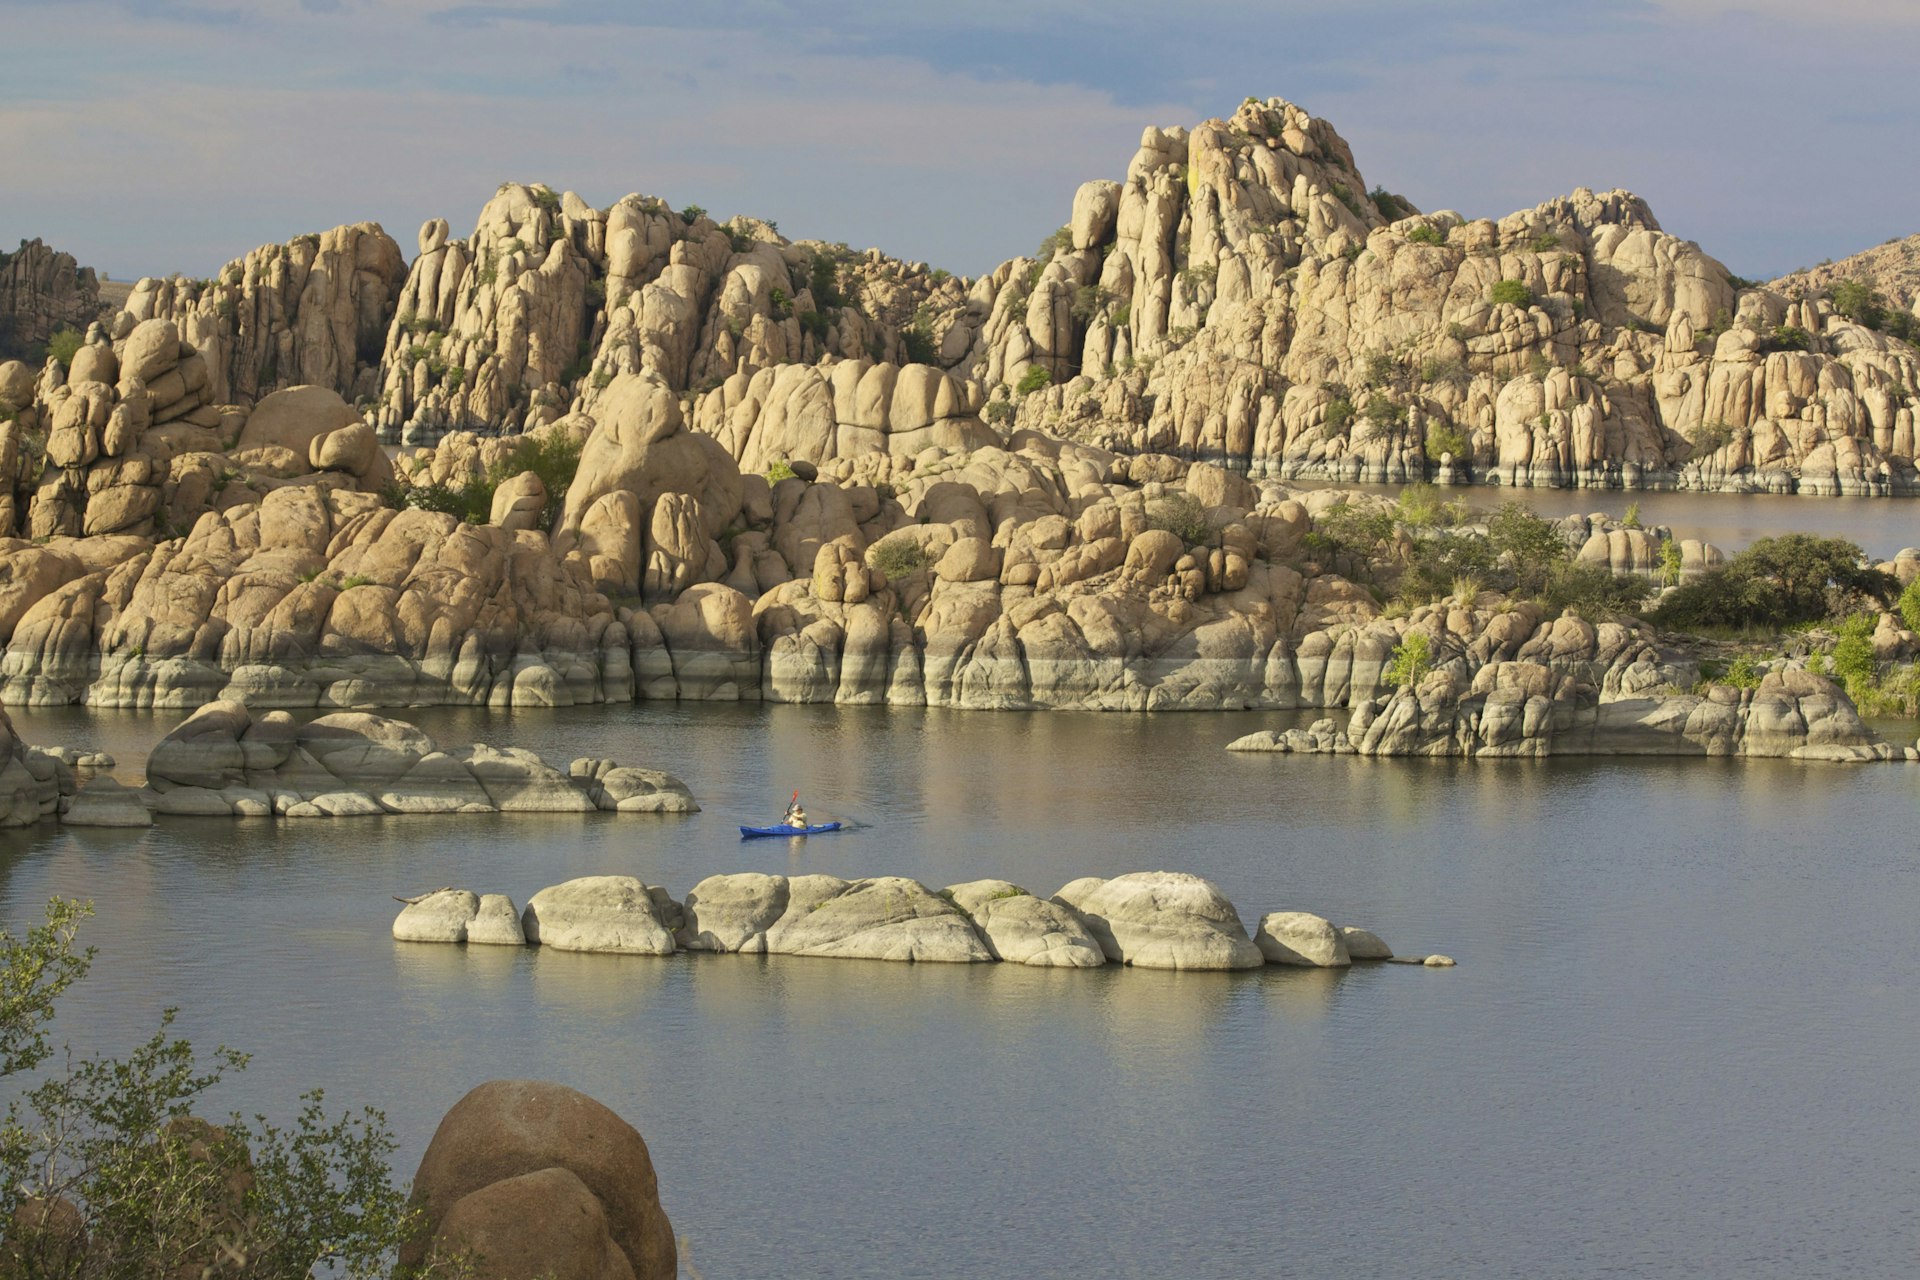 Explore 380 acres of calm water surrounded by Watson Lake’s granite-boulder shores. Image by equigini / Getty